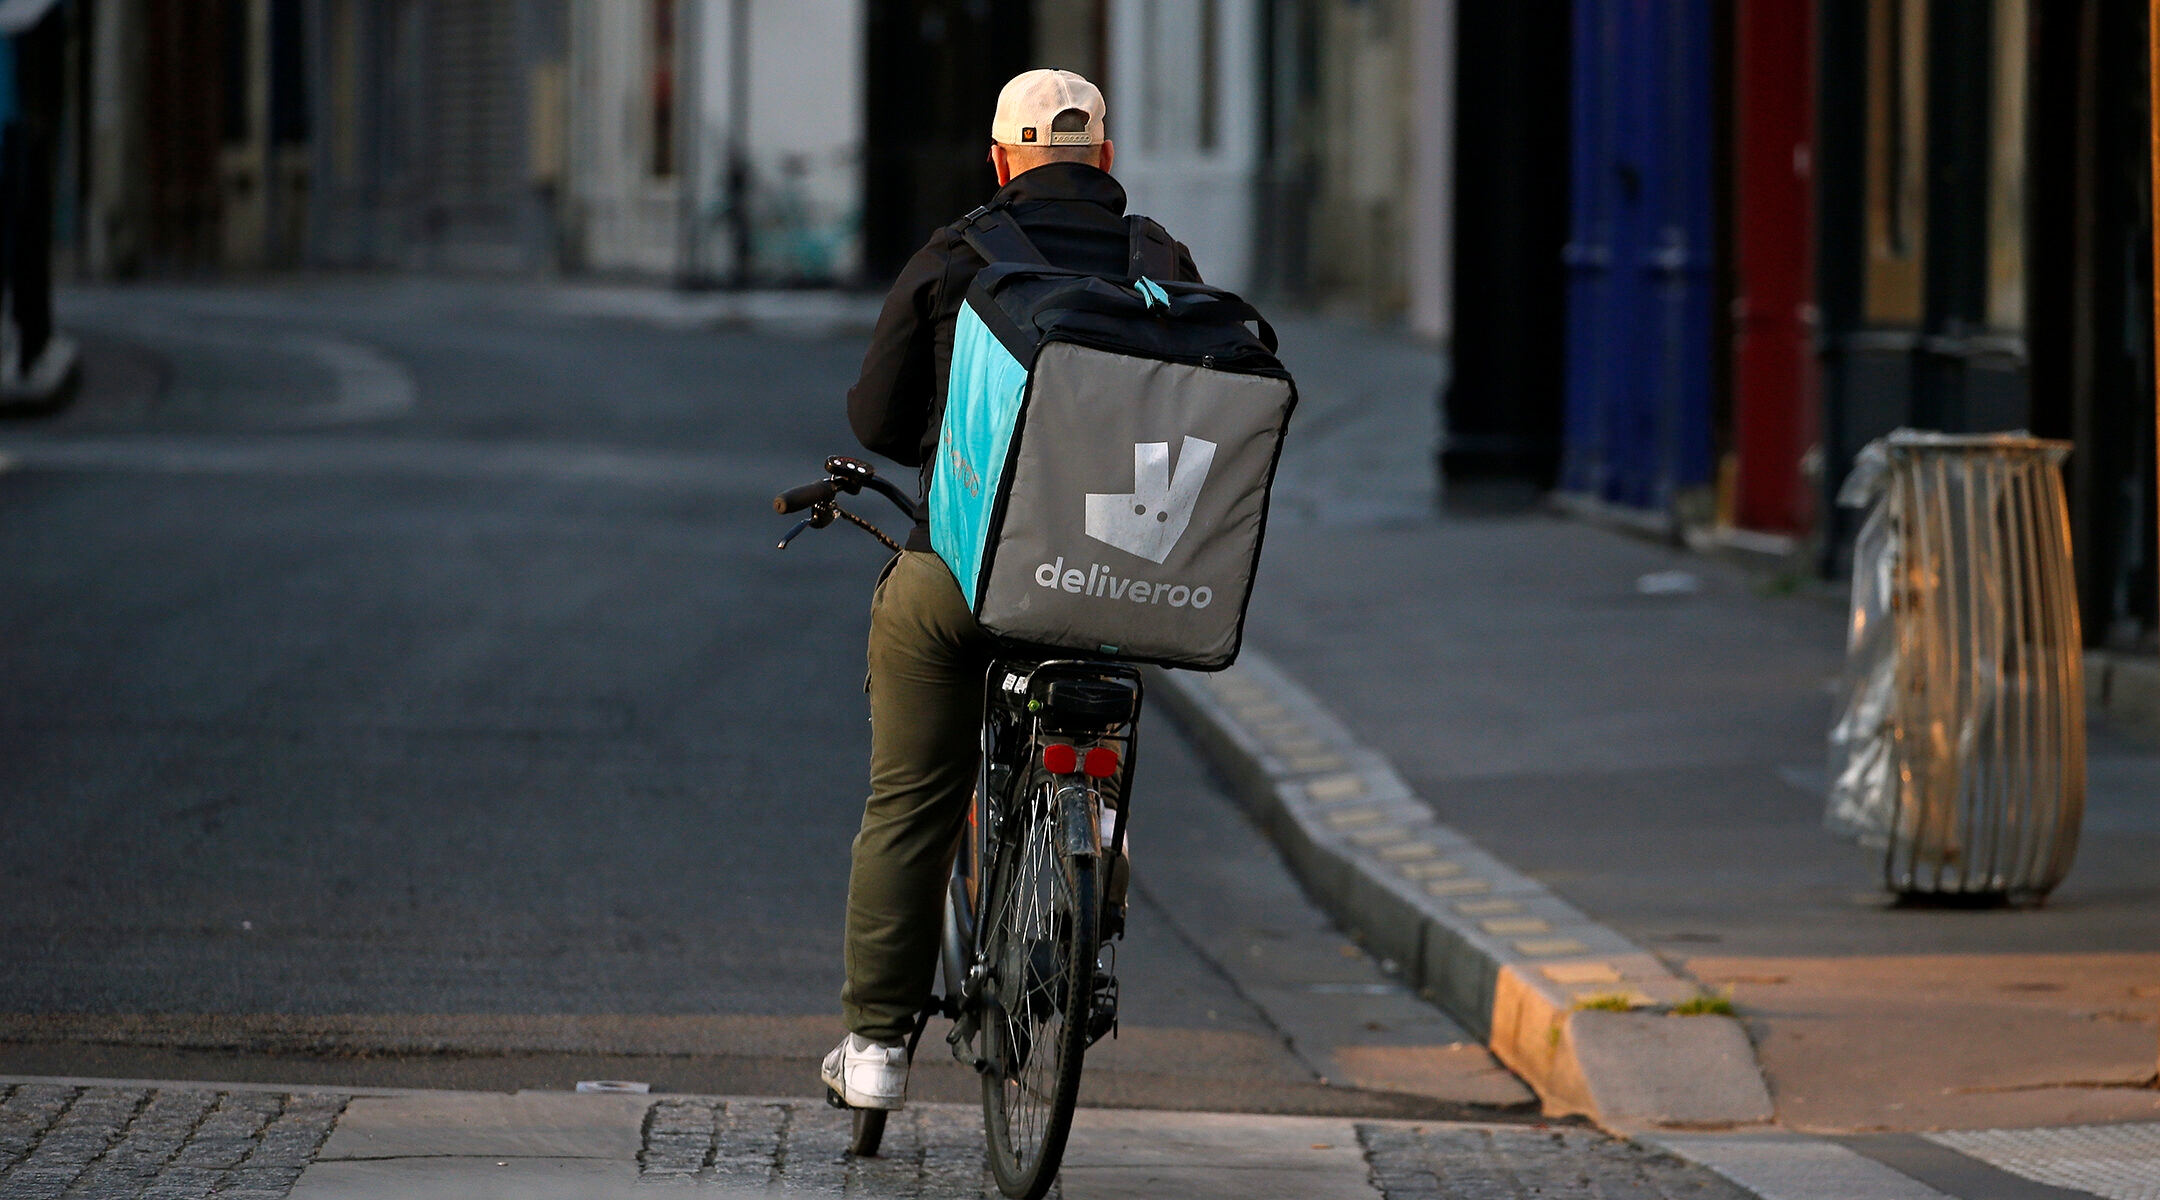 A deliveryman for Deliveroo rides his bike in Paris, France on April 12, 2020. (Chesnot/Getty Images)